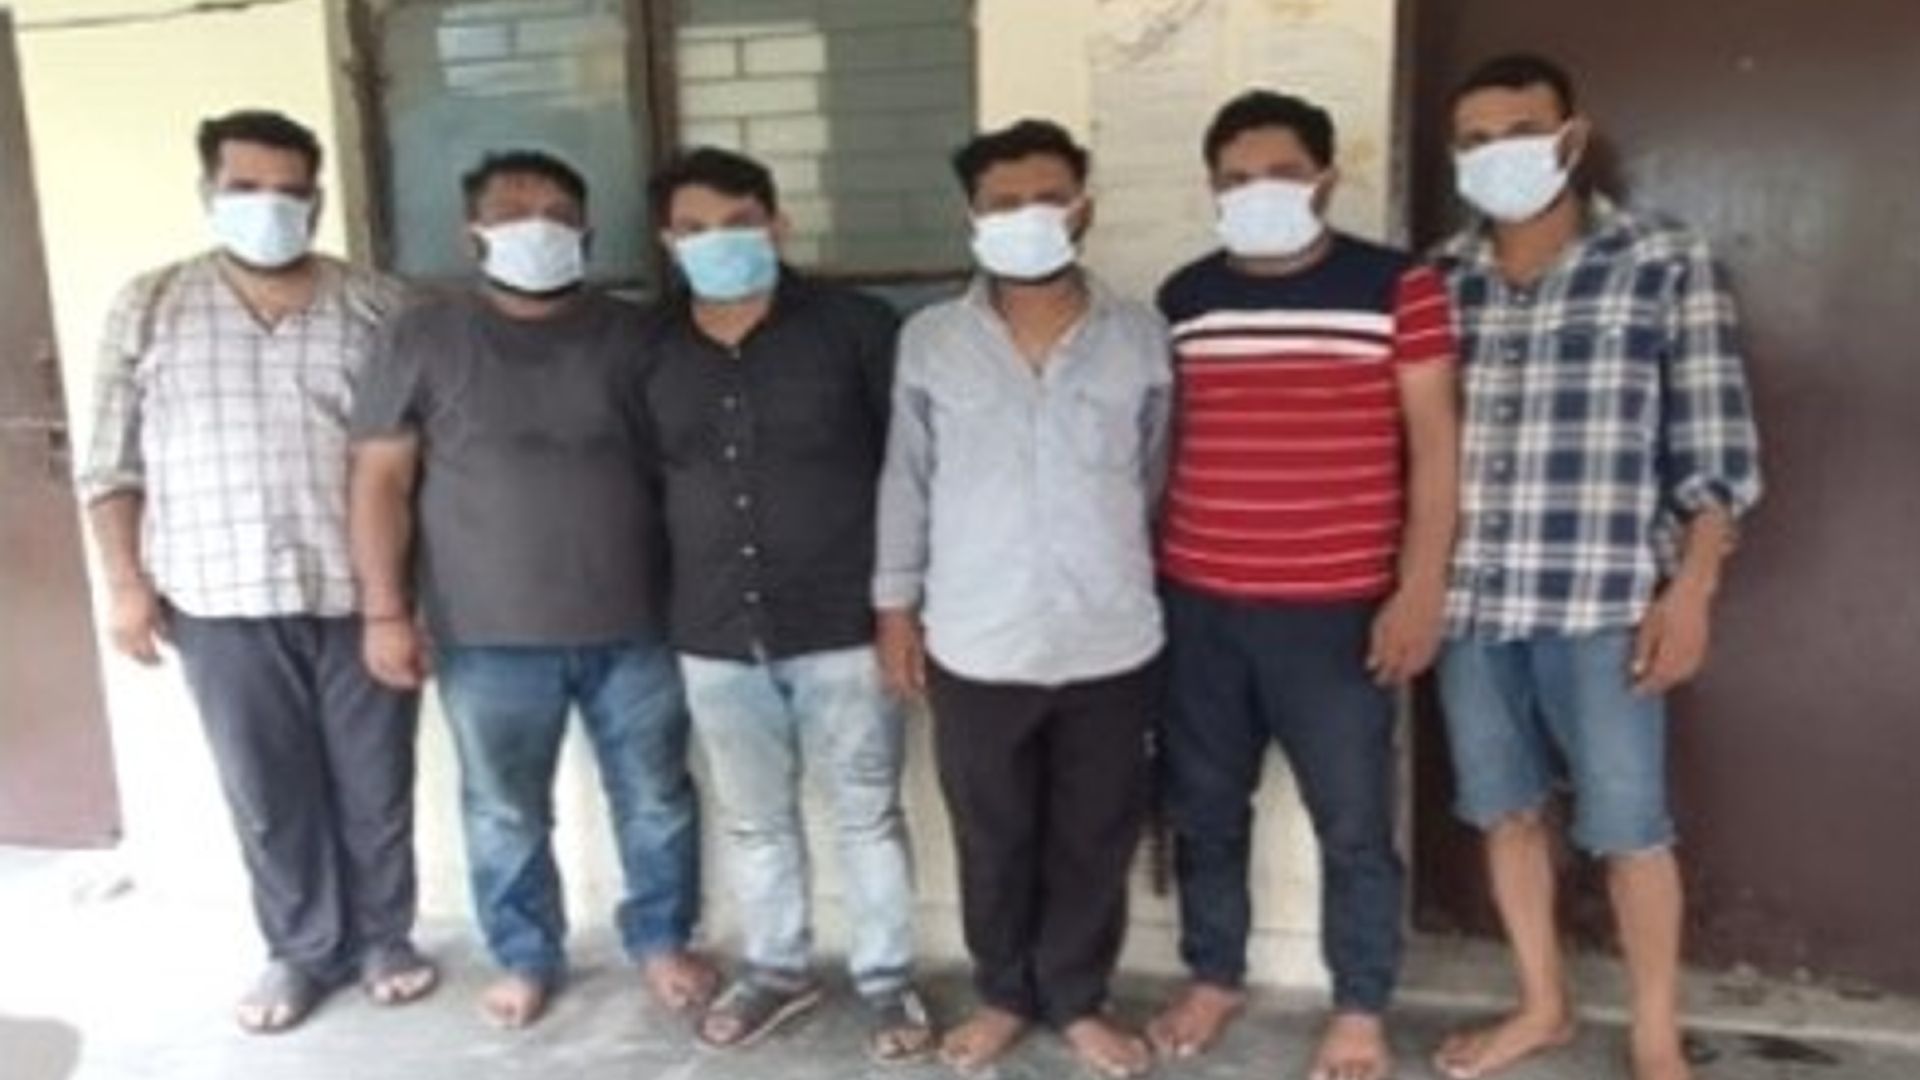 Inter-State vehicle theft gang nabbed by Noida Police (Source: X/Noida Police)